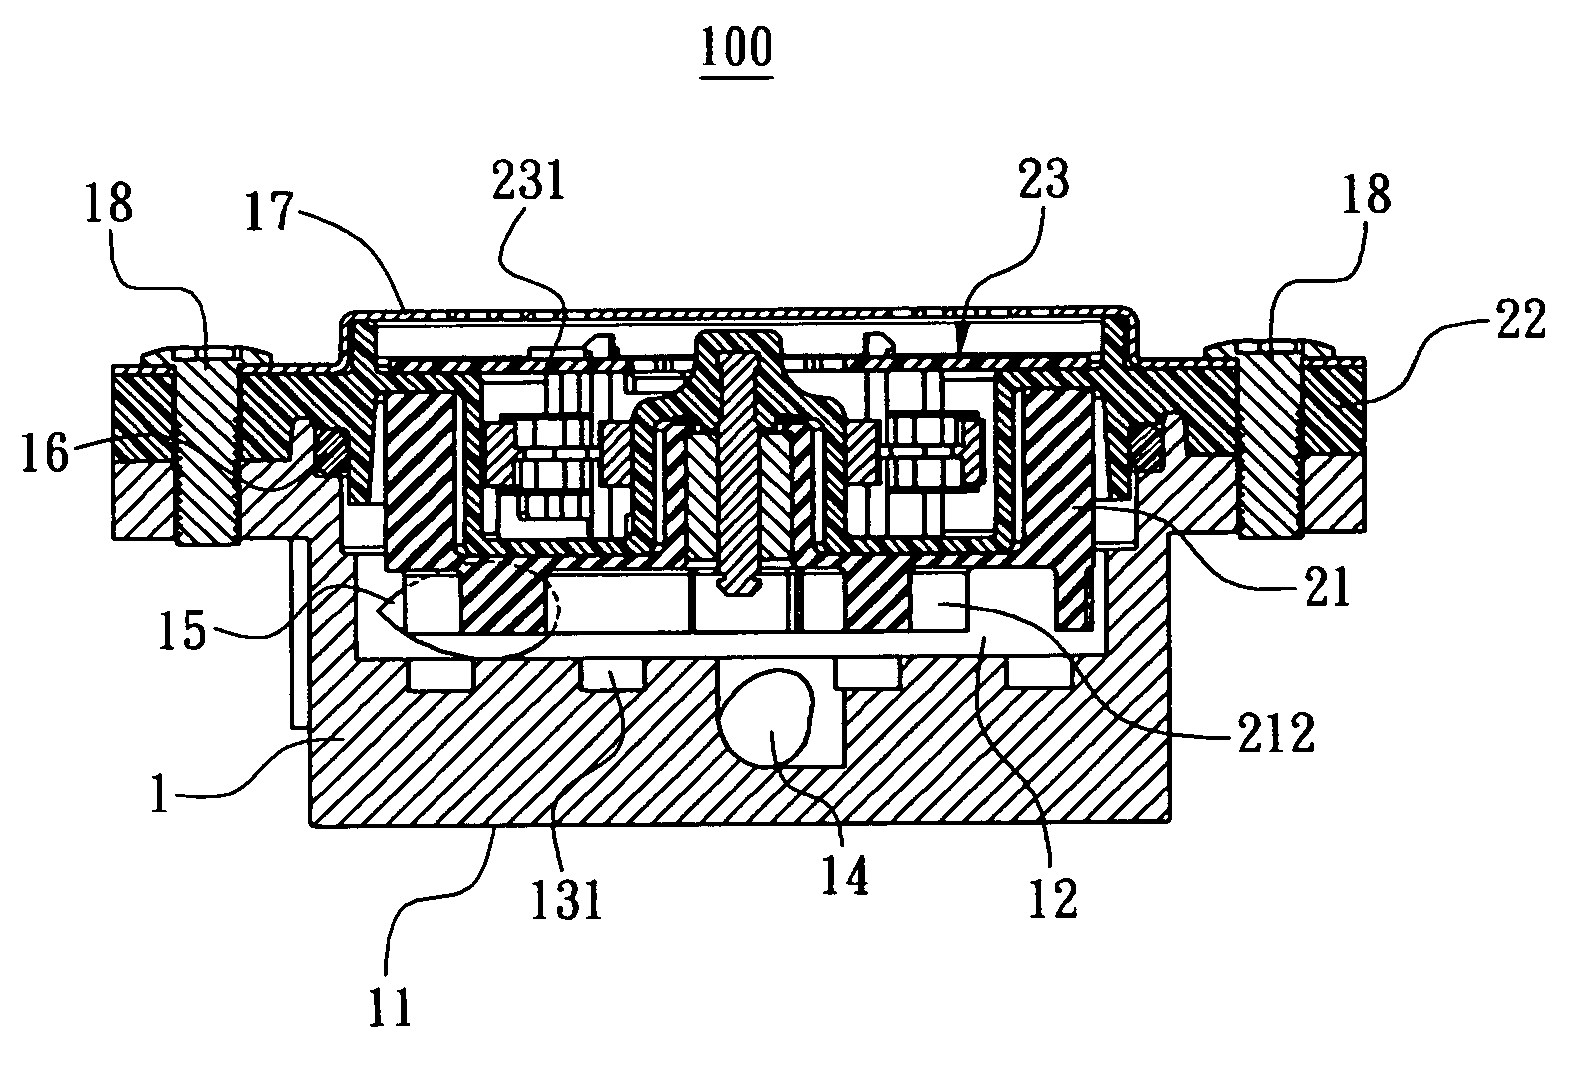 Water-cooling heat dissipation device